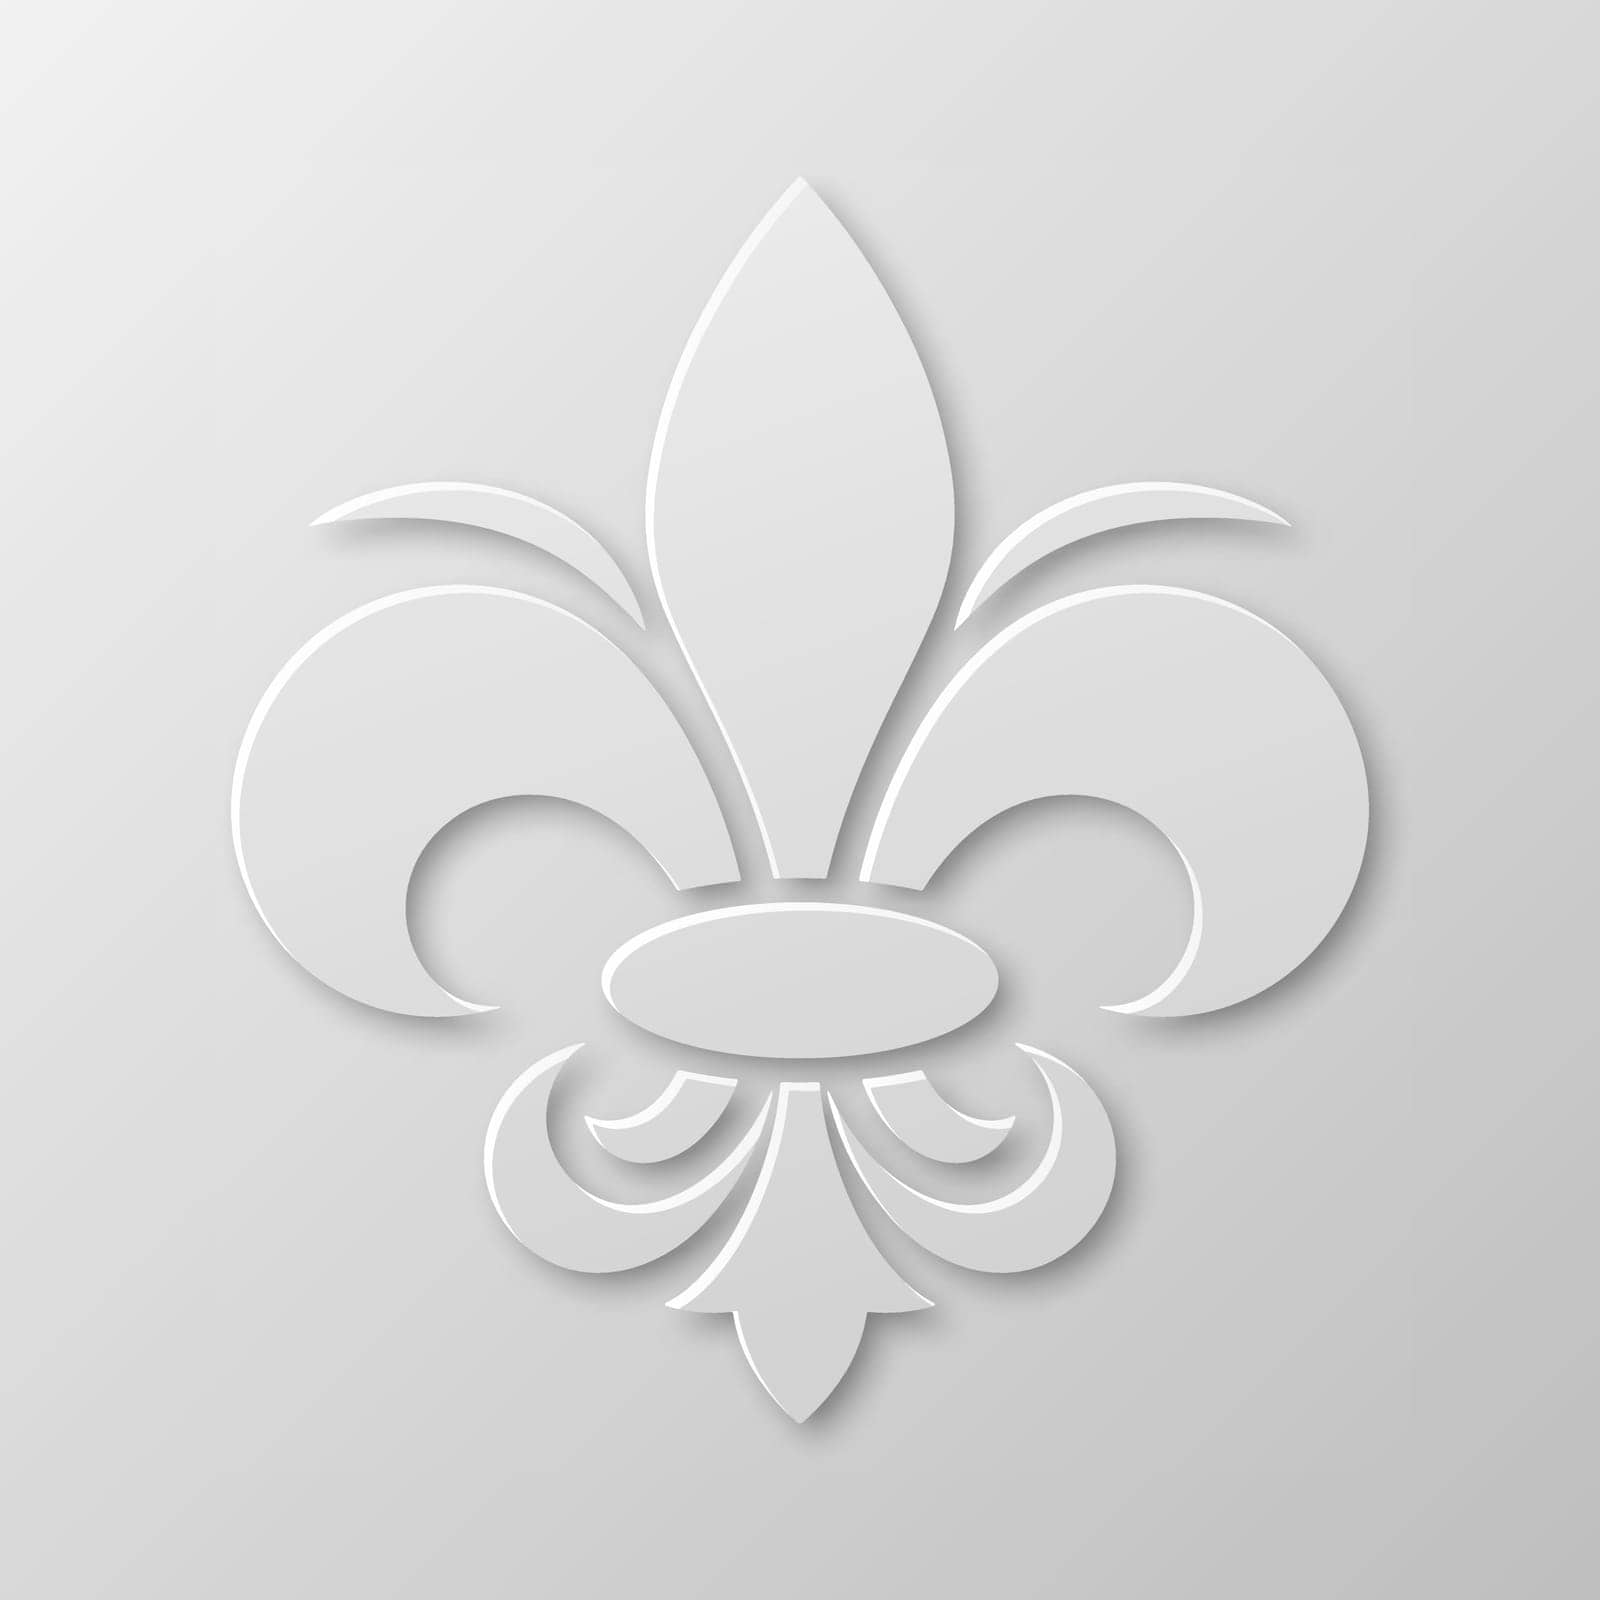 Vector Realistic Paper 3d Fleur De Lis Closeup on White Background. Heraldic Lily Sign, Vector Illustration by Gomolach